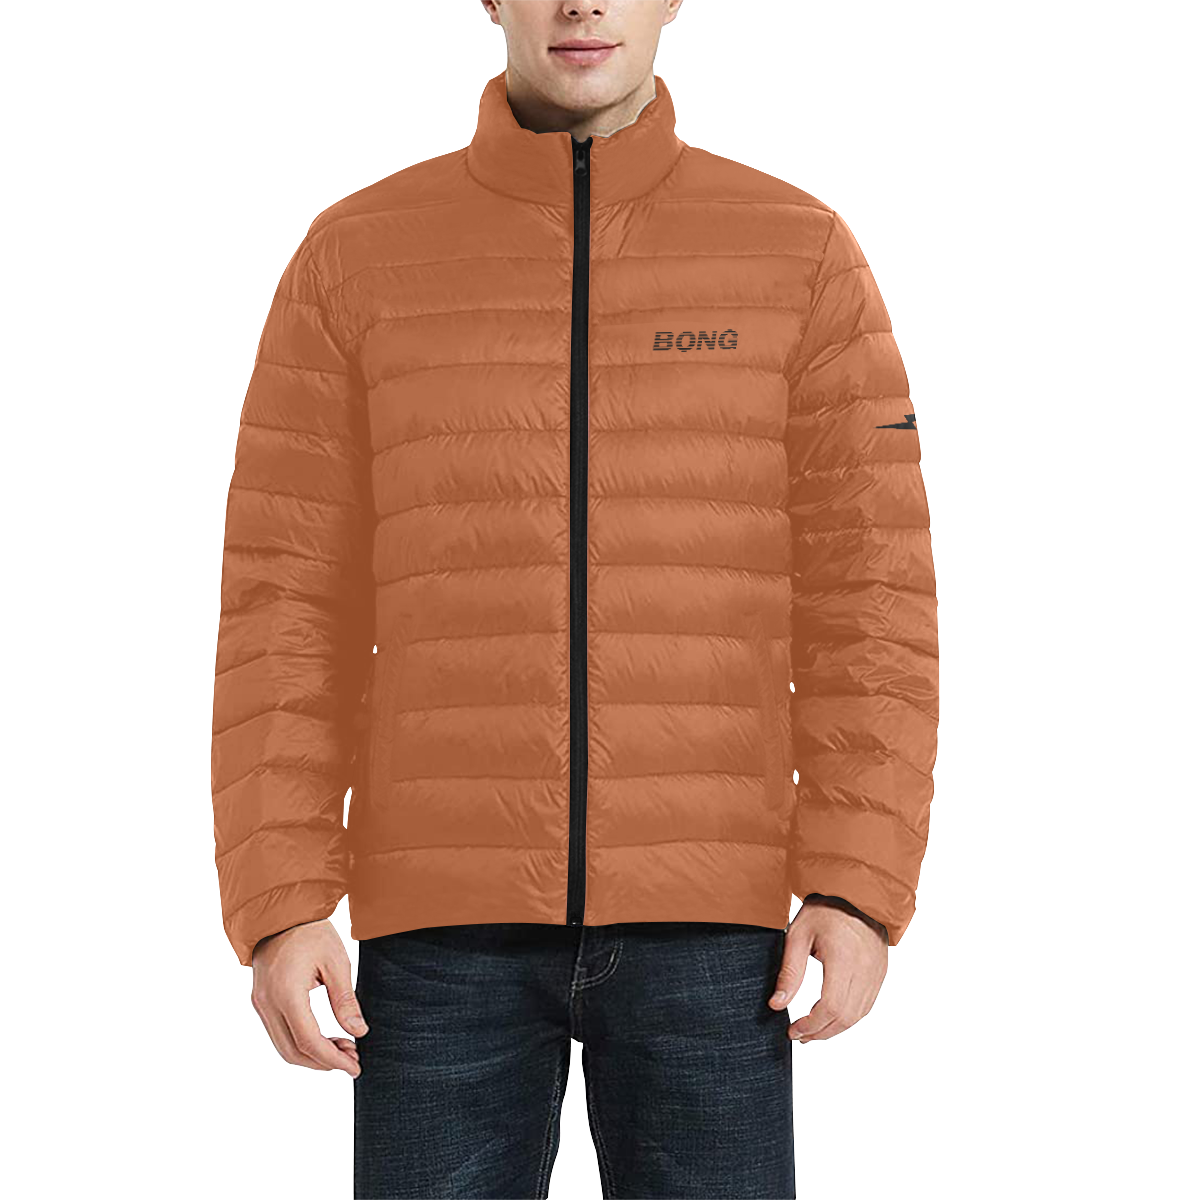 Billy X Bong Winter Apparel Men's Stand Collar Padded Jacket (Model H41)